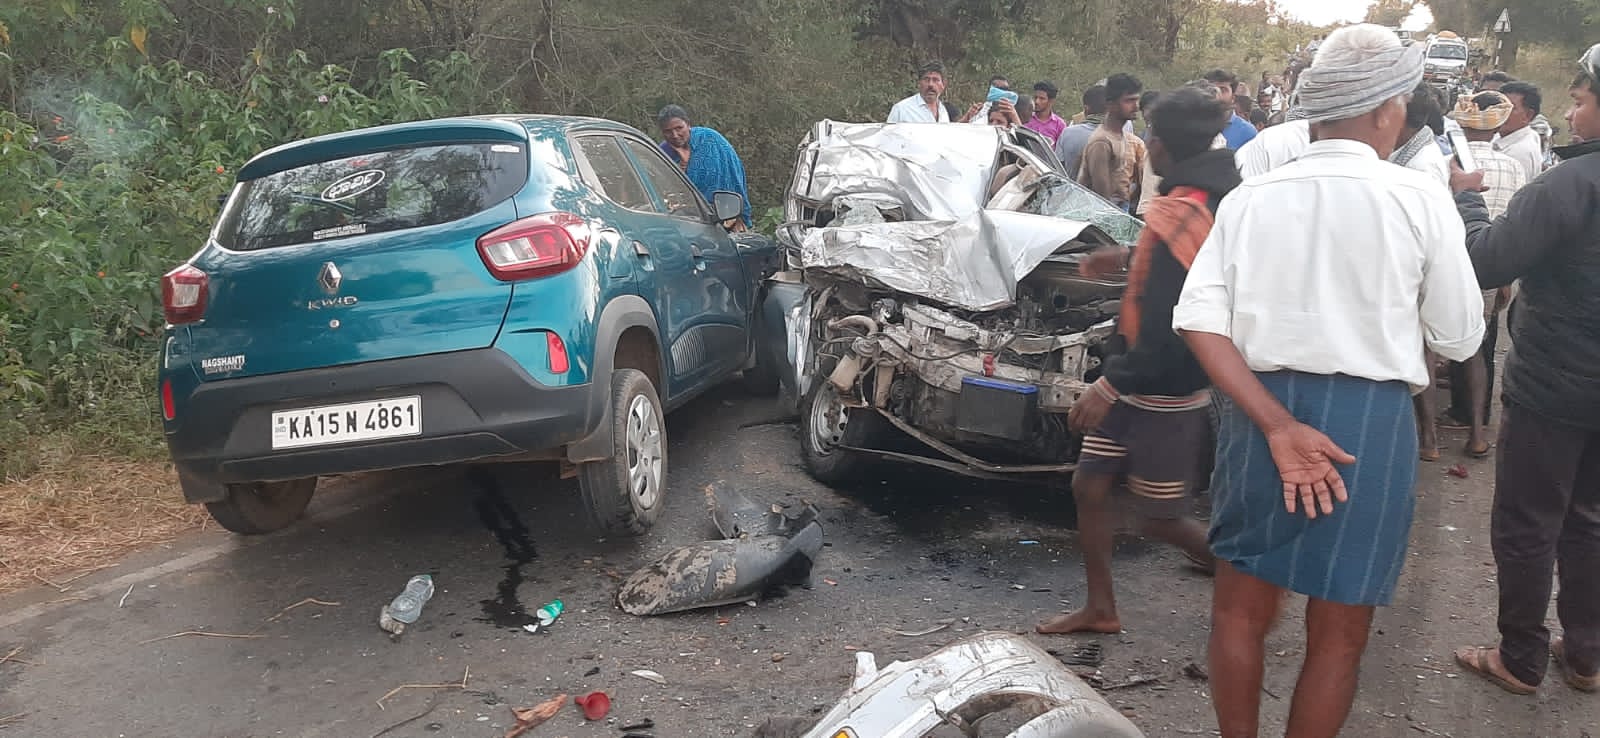 four-killed-in-road-accident-in-haveri